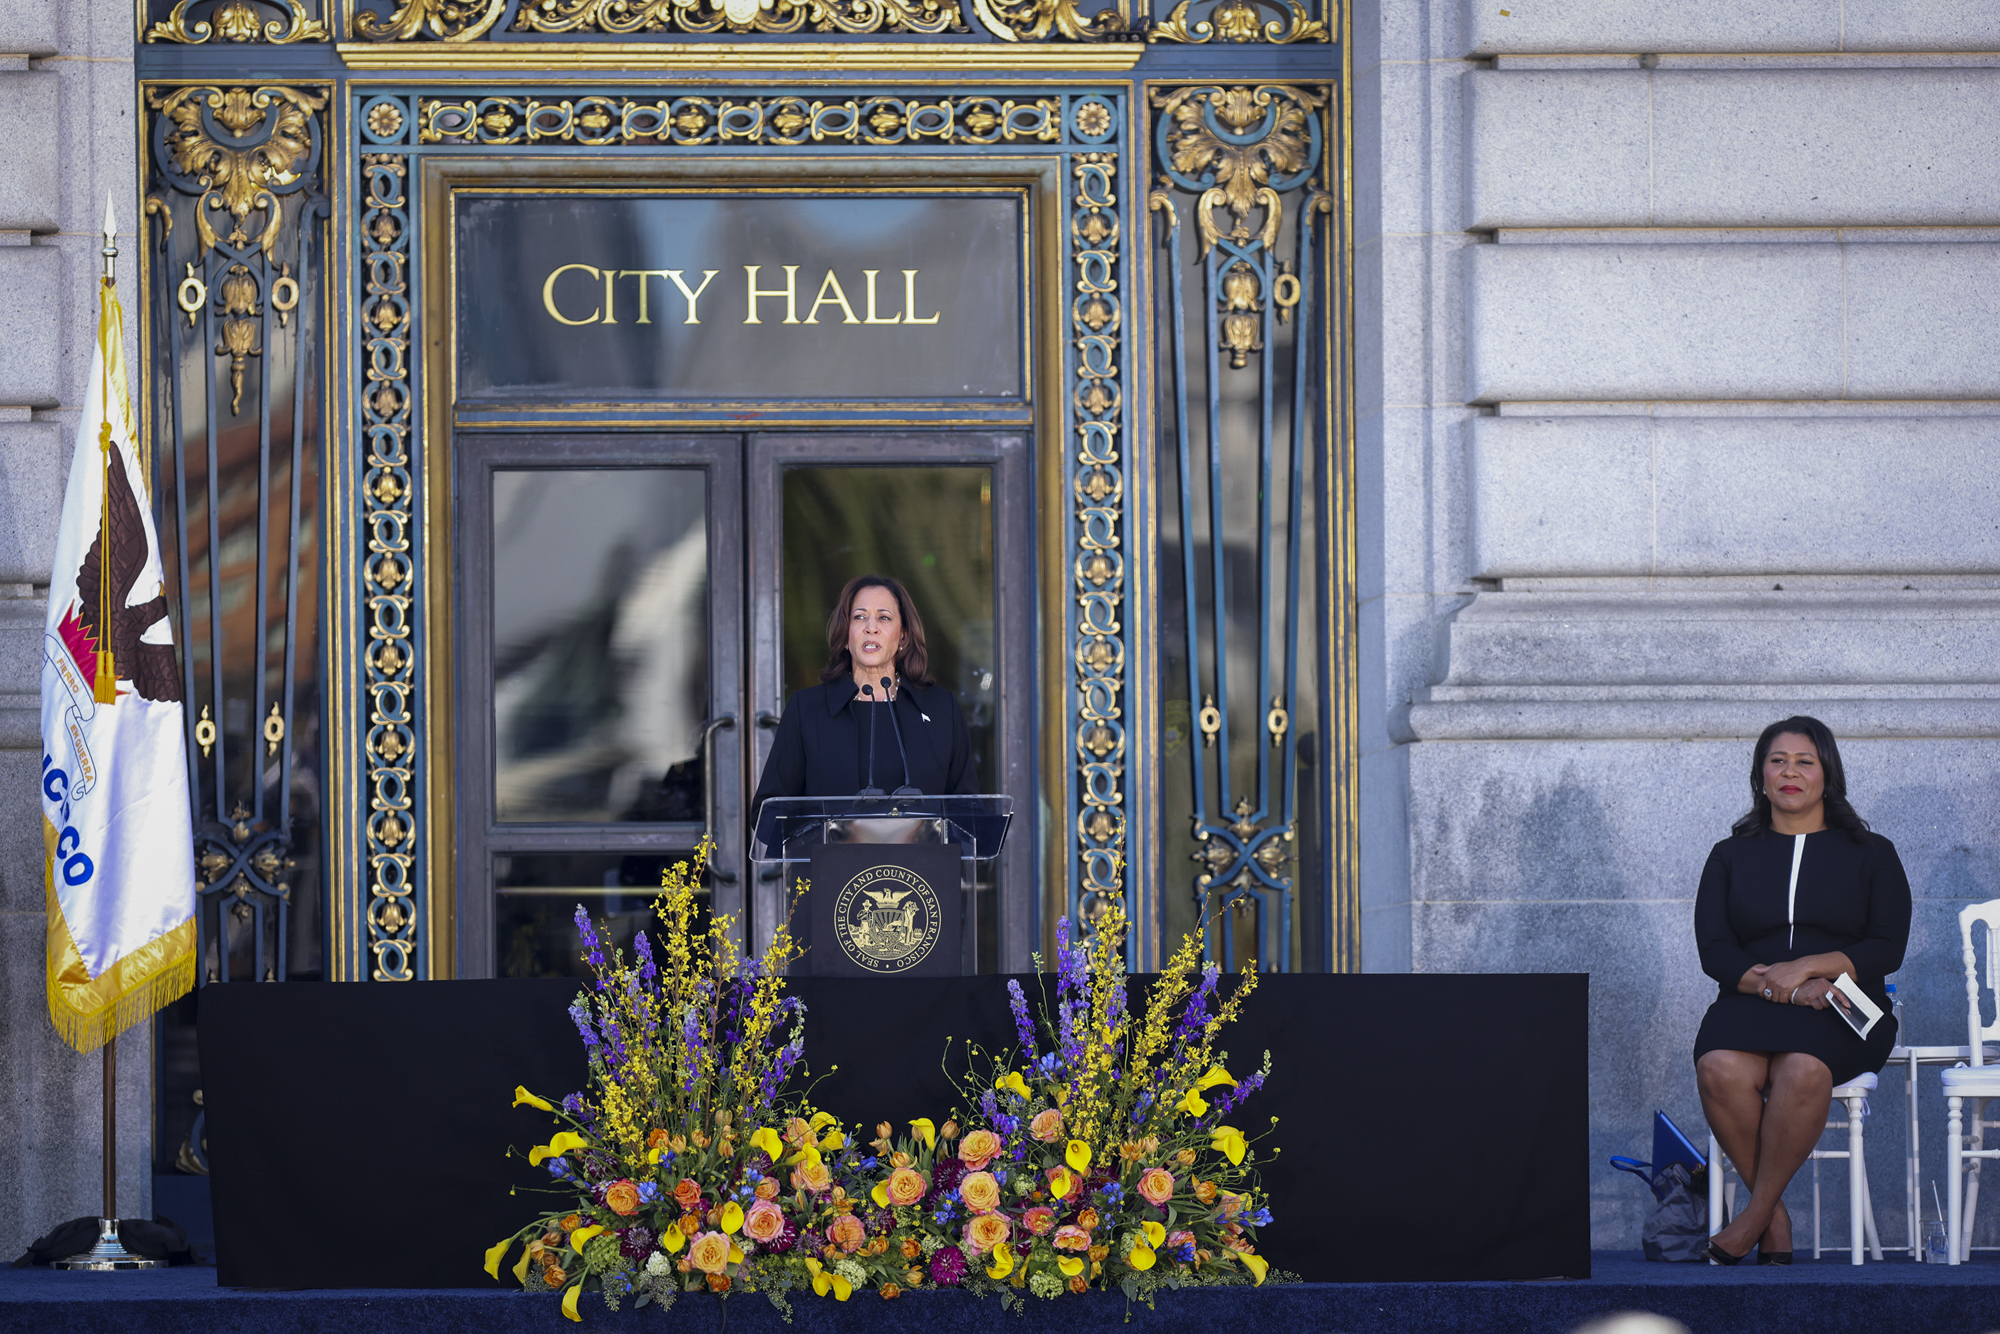 Woman speaks at lectern in front of building